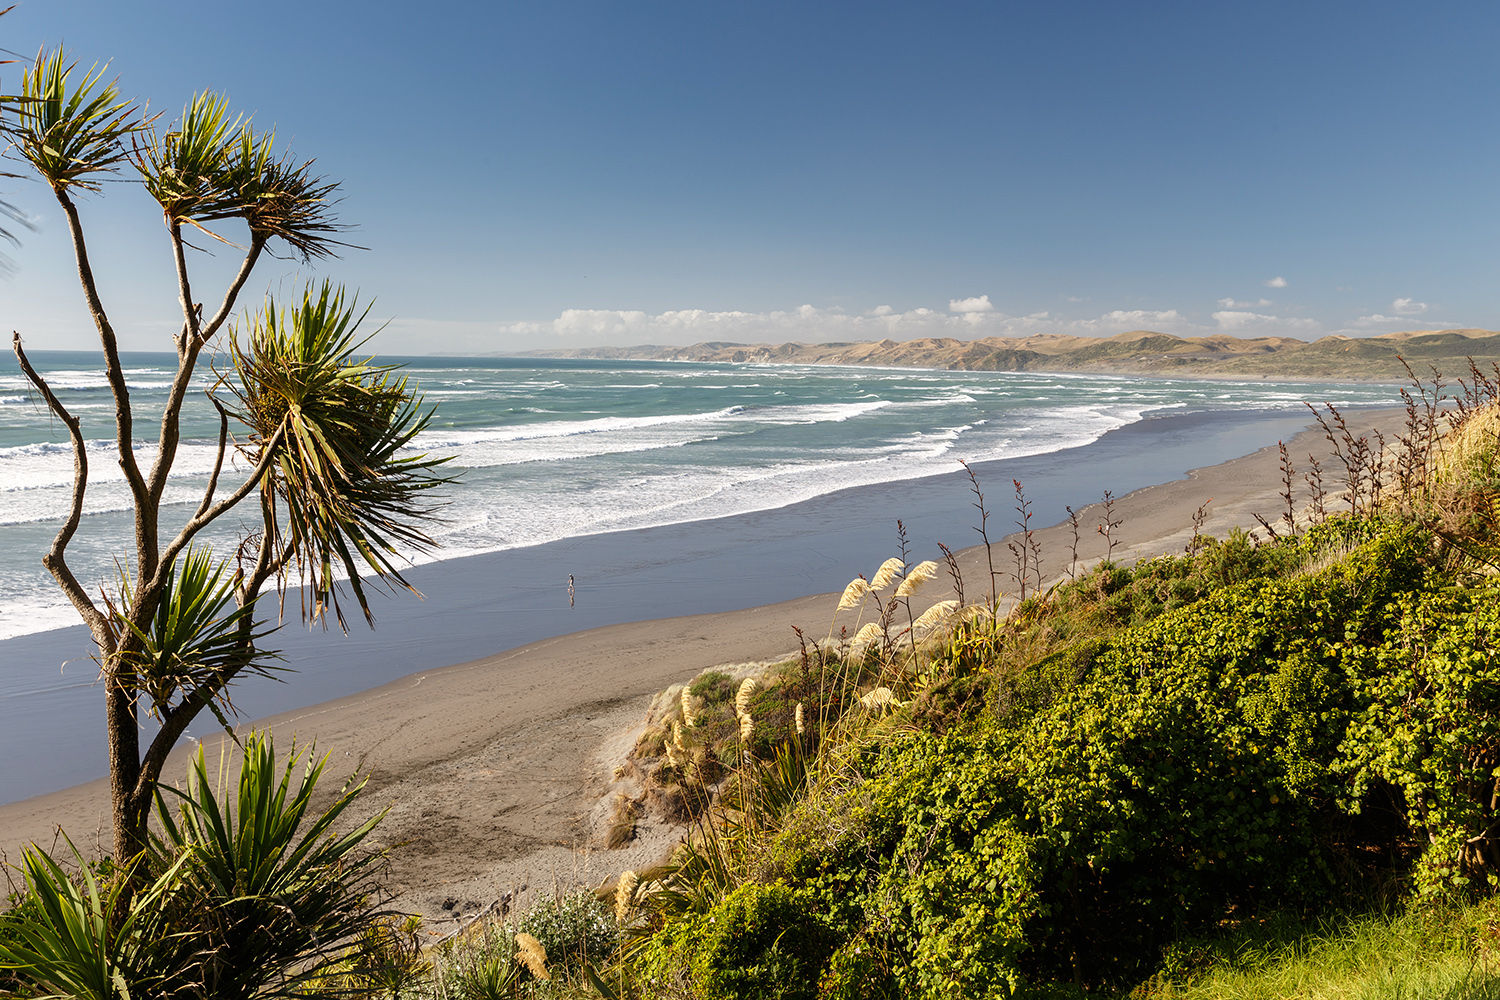 Looking for the perfect waves to learn surfing? Look no further than Ngarunui Beach in Raglan, New Zealand. Image by Florian Bugiel / CC BY-SA 2.0